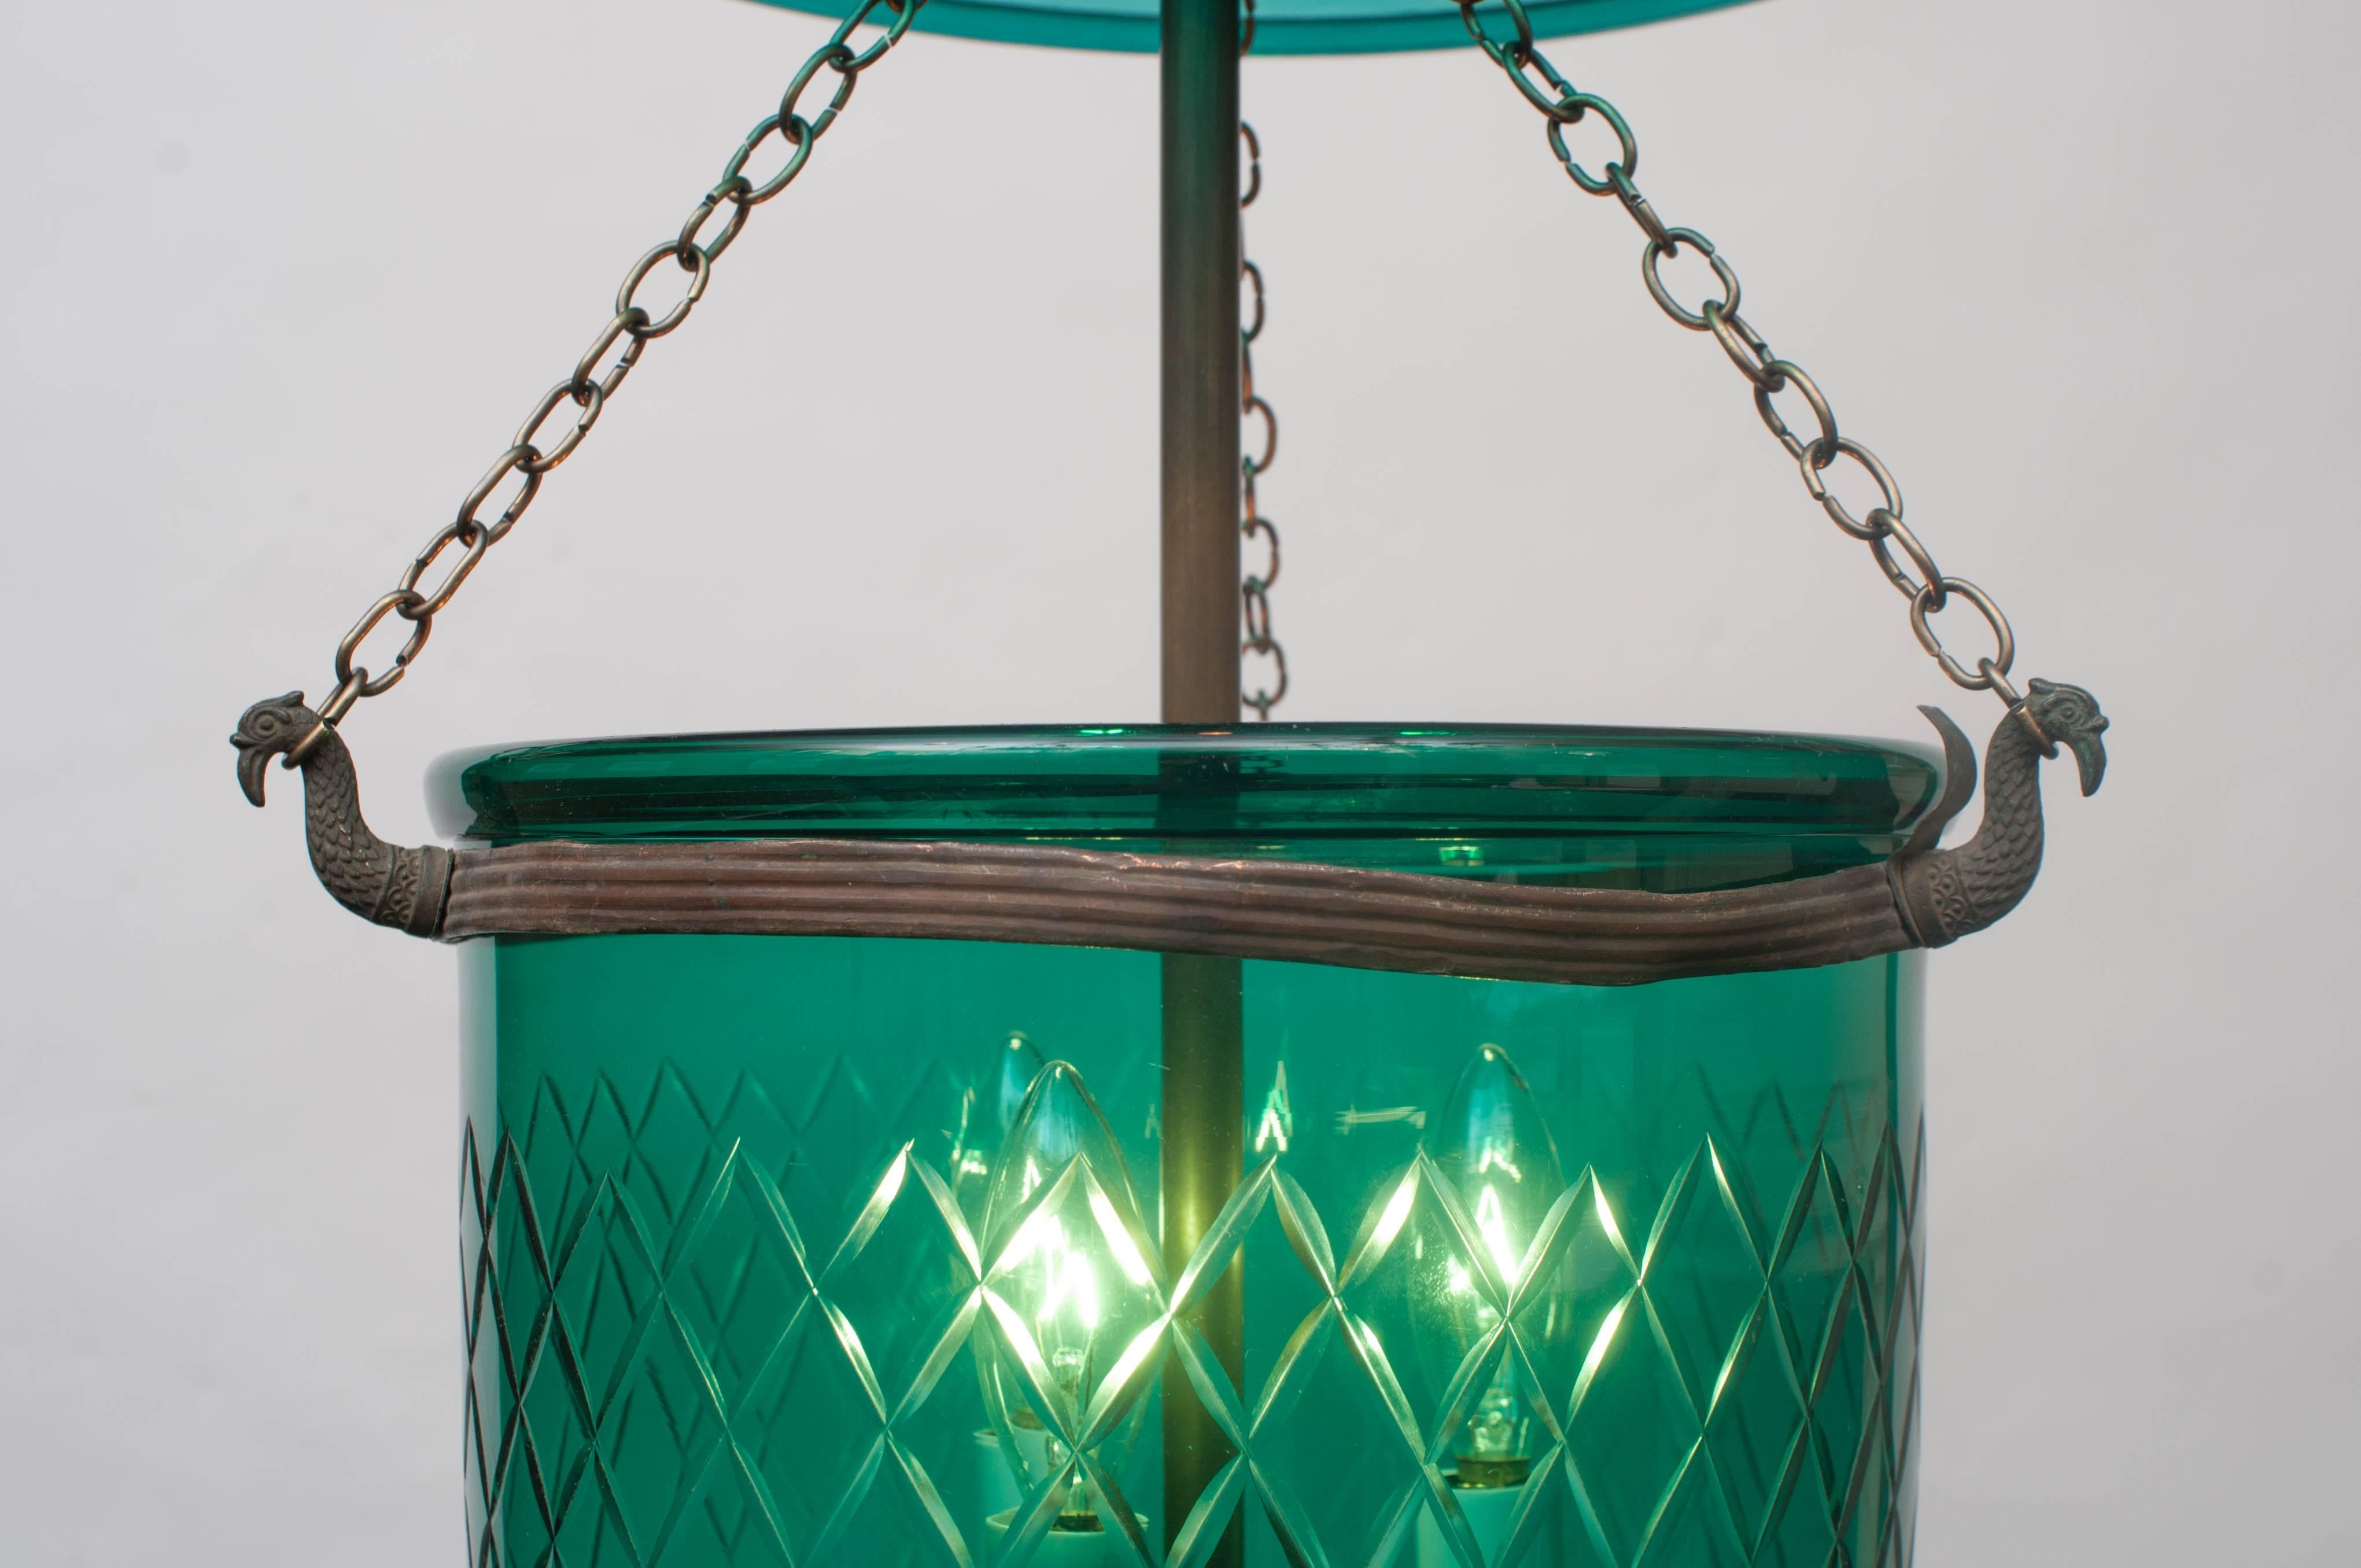 Handblown and cut with unique color and design - glass pontil (finial) - originally candle or oil-burning, now wired with three-light cluster electrical assembly - original brass components. Height can be adjusted. Ceiling cap, chain and hanging